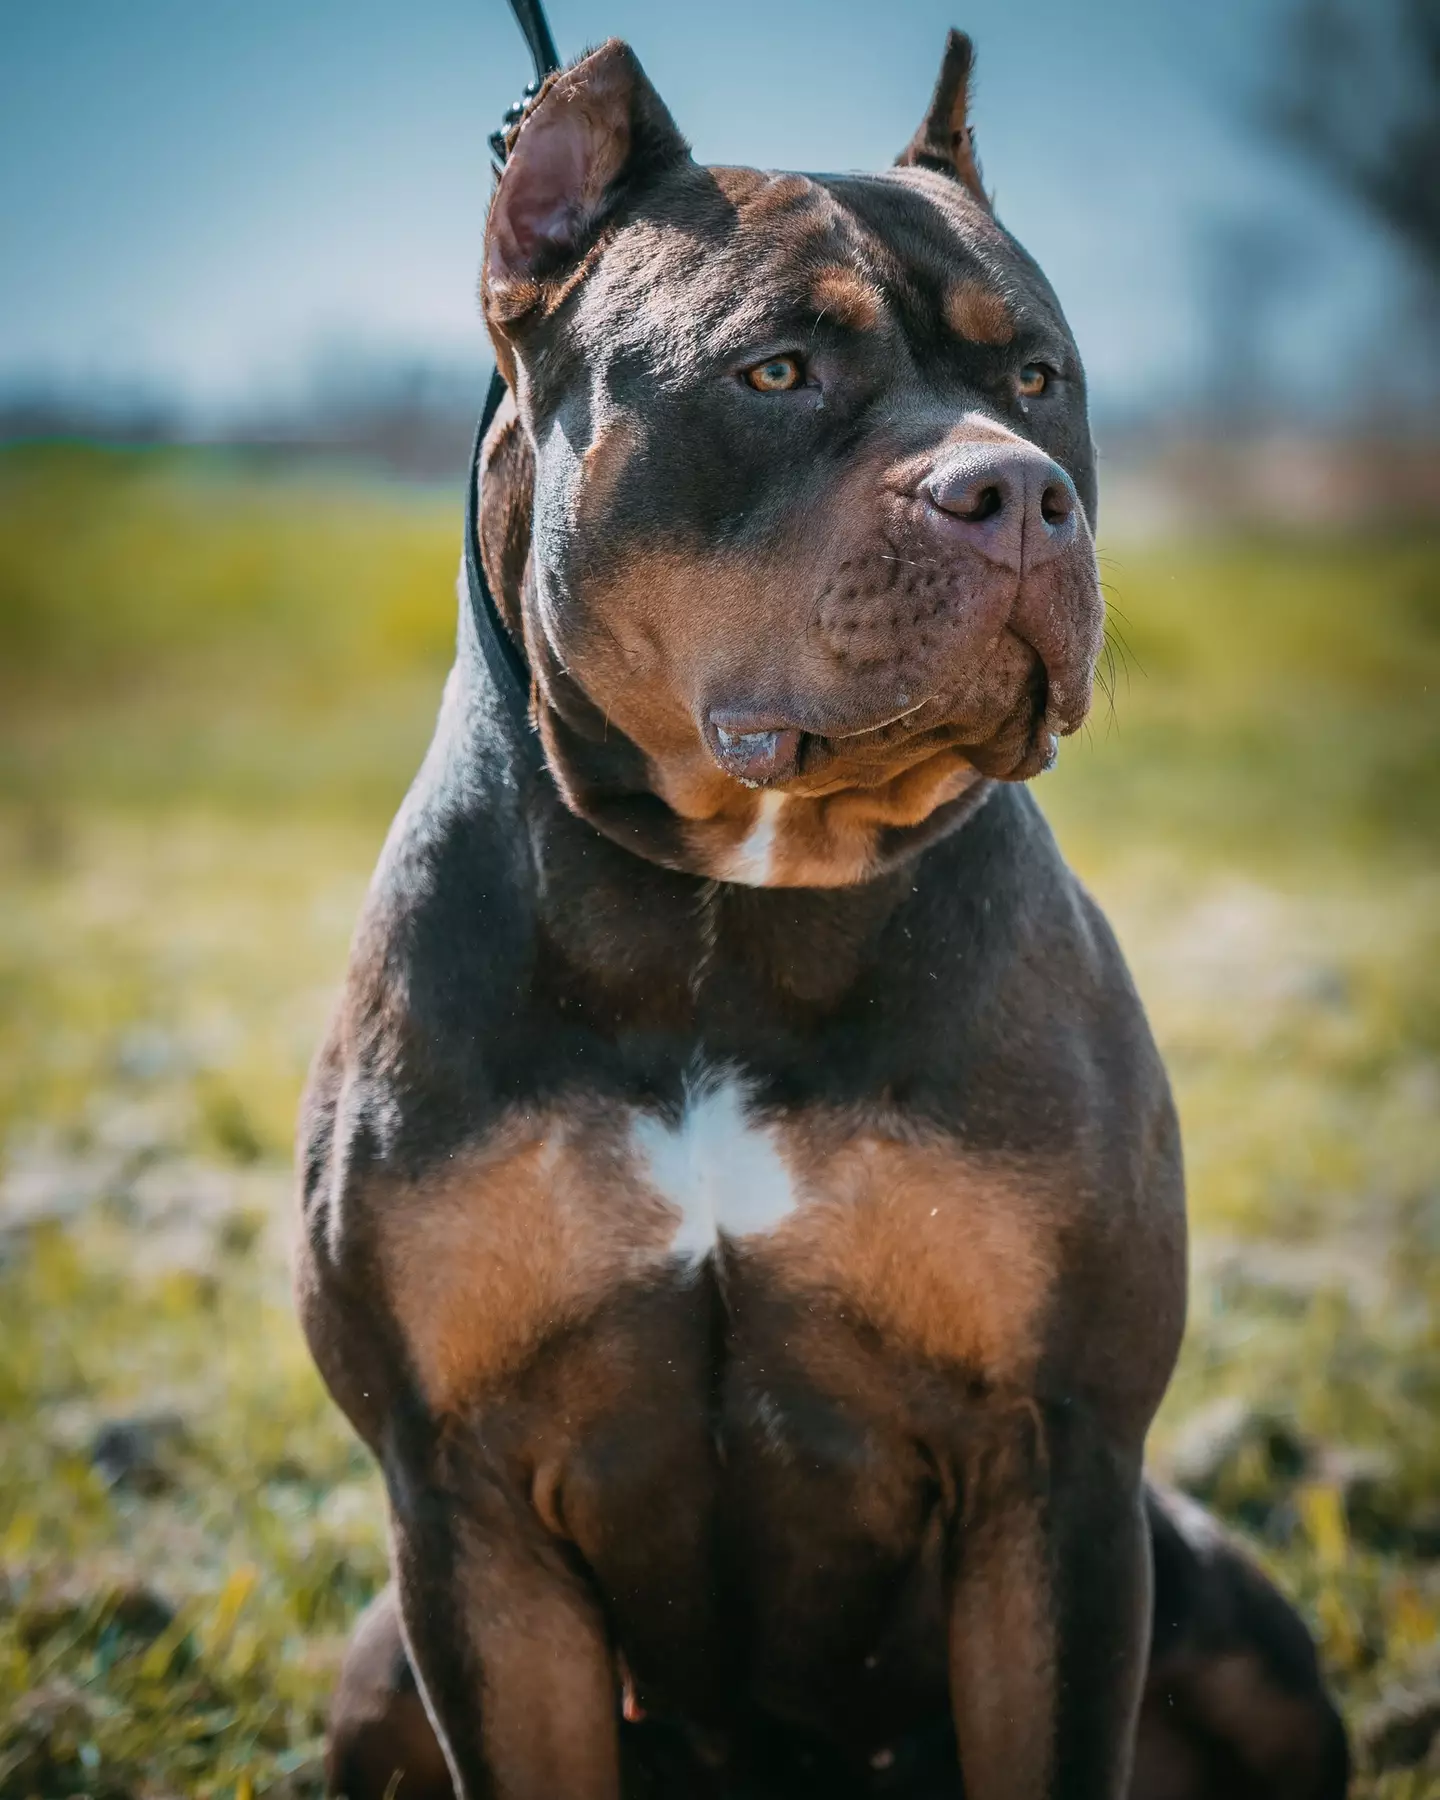 The XL bully breed has now officially been banned in England and Wales.